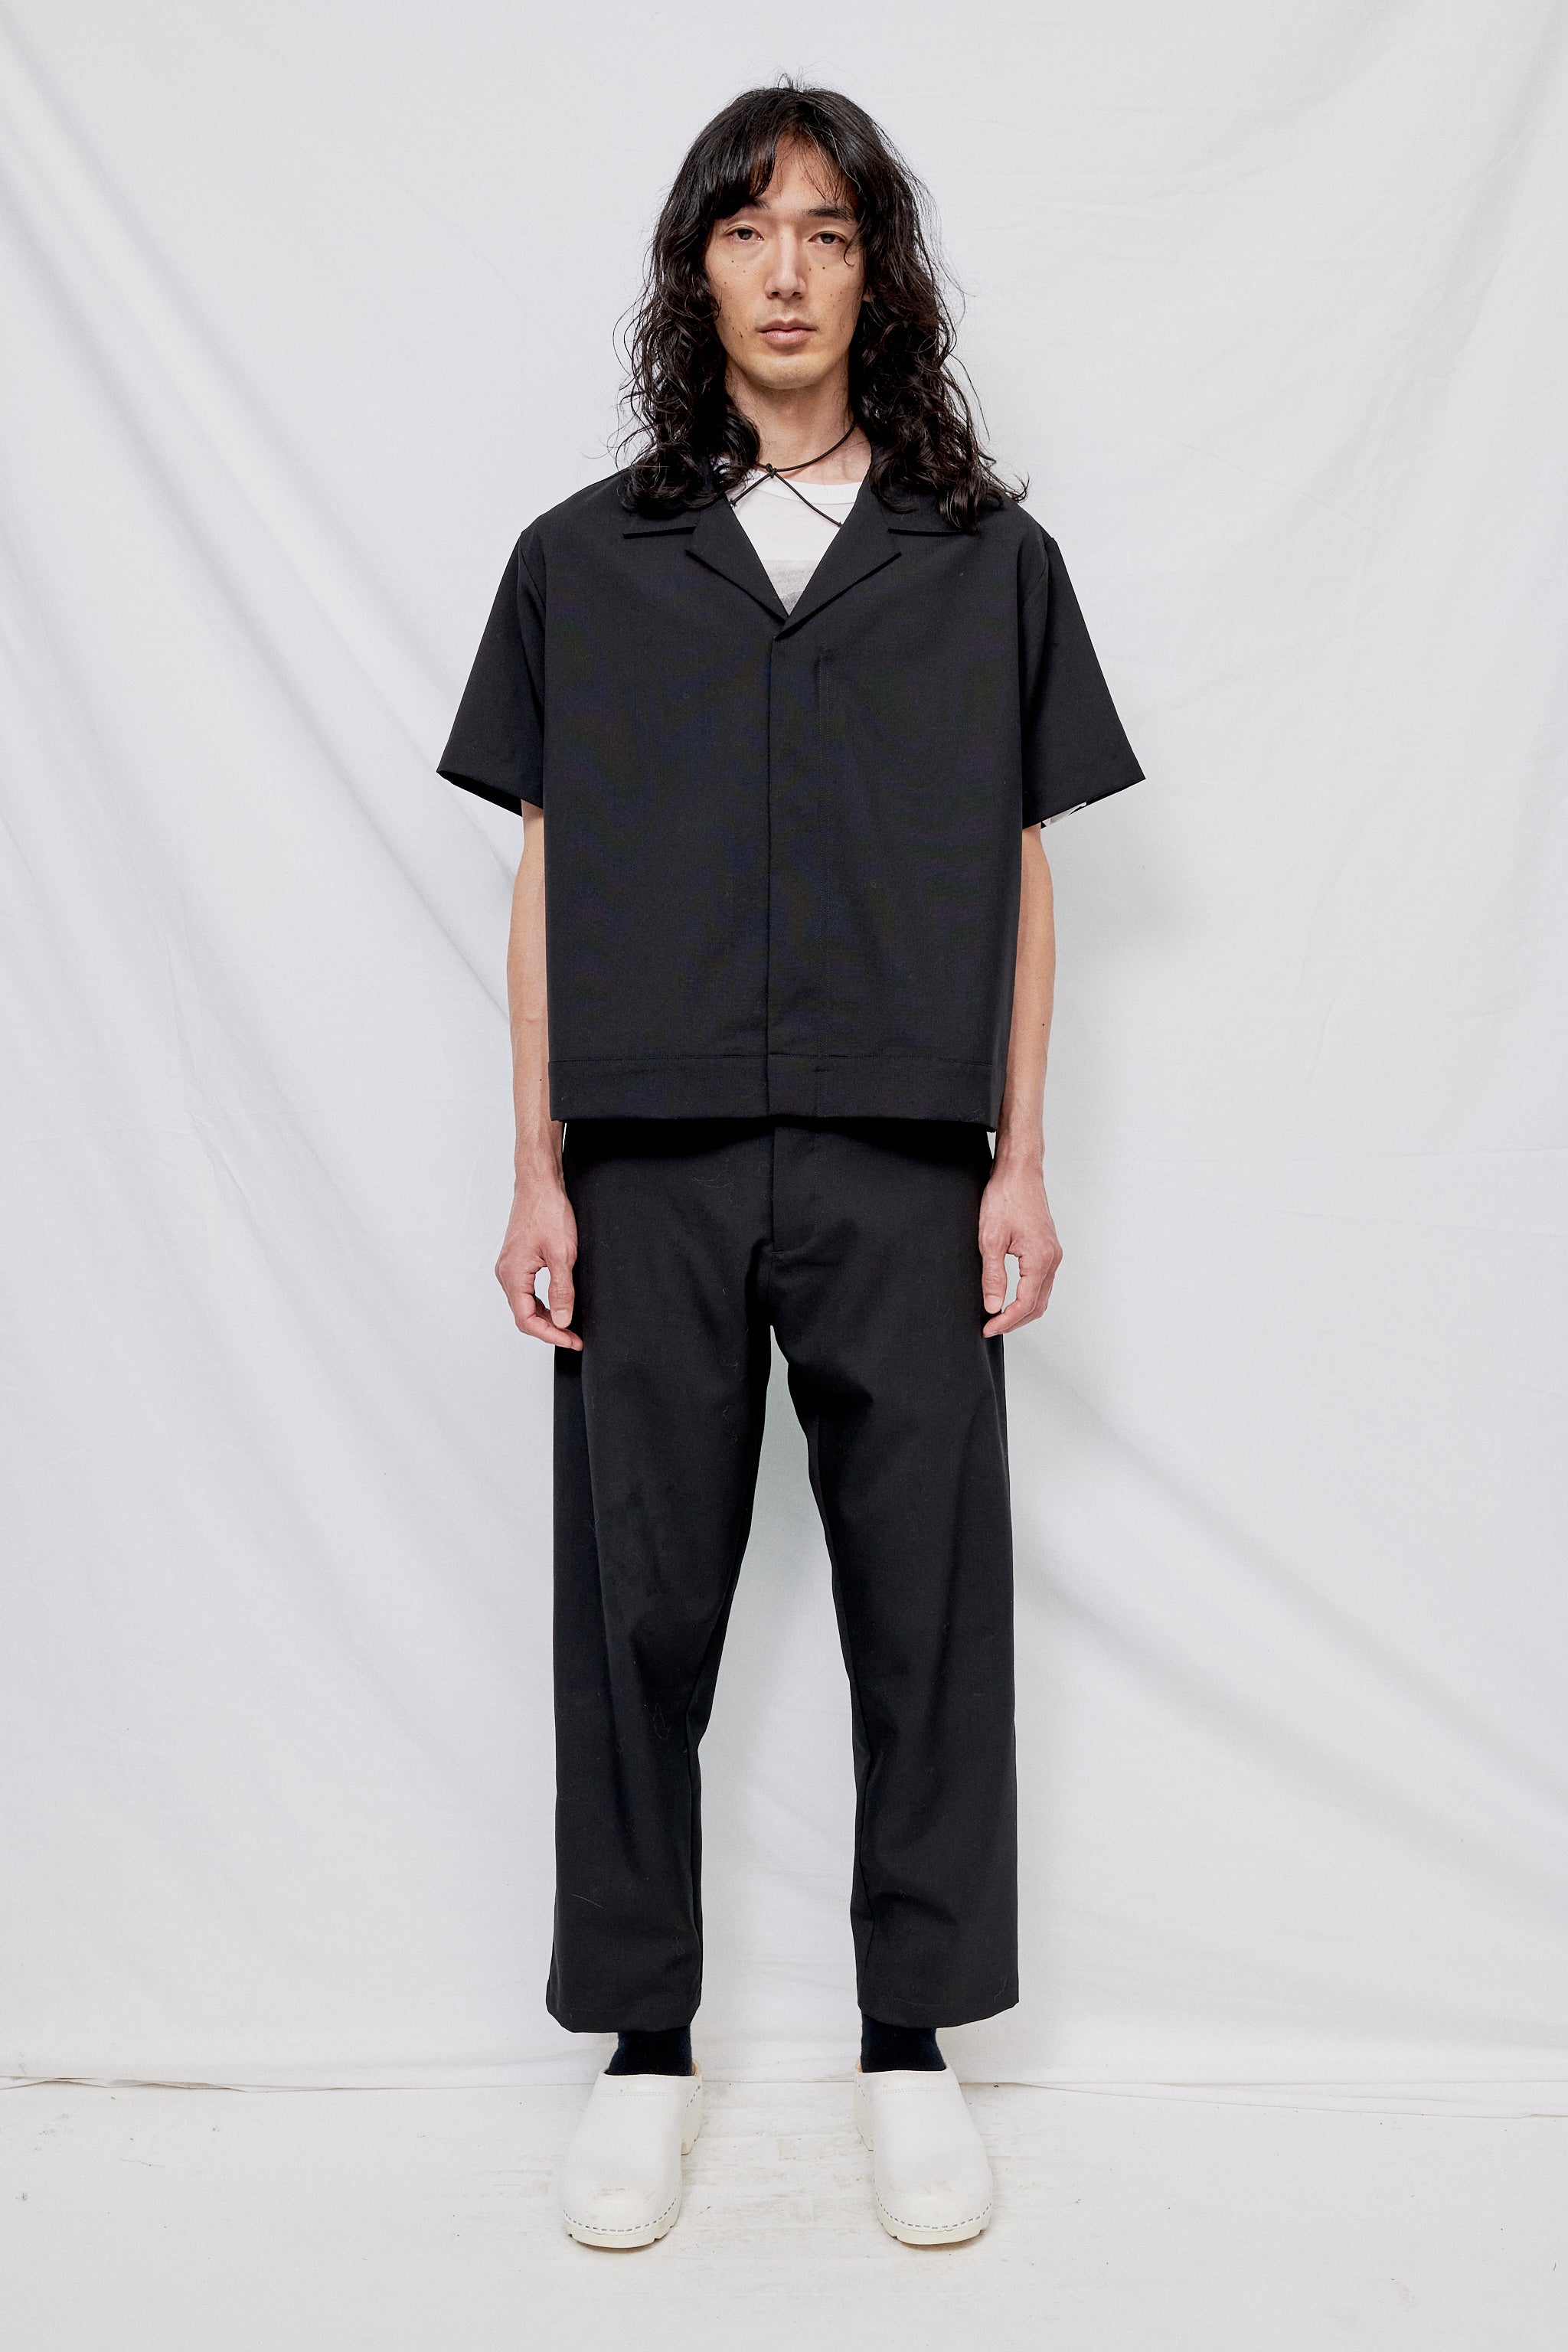 Black Suiting Zip Bowling Shirt - Assembly New York | Assembly New York